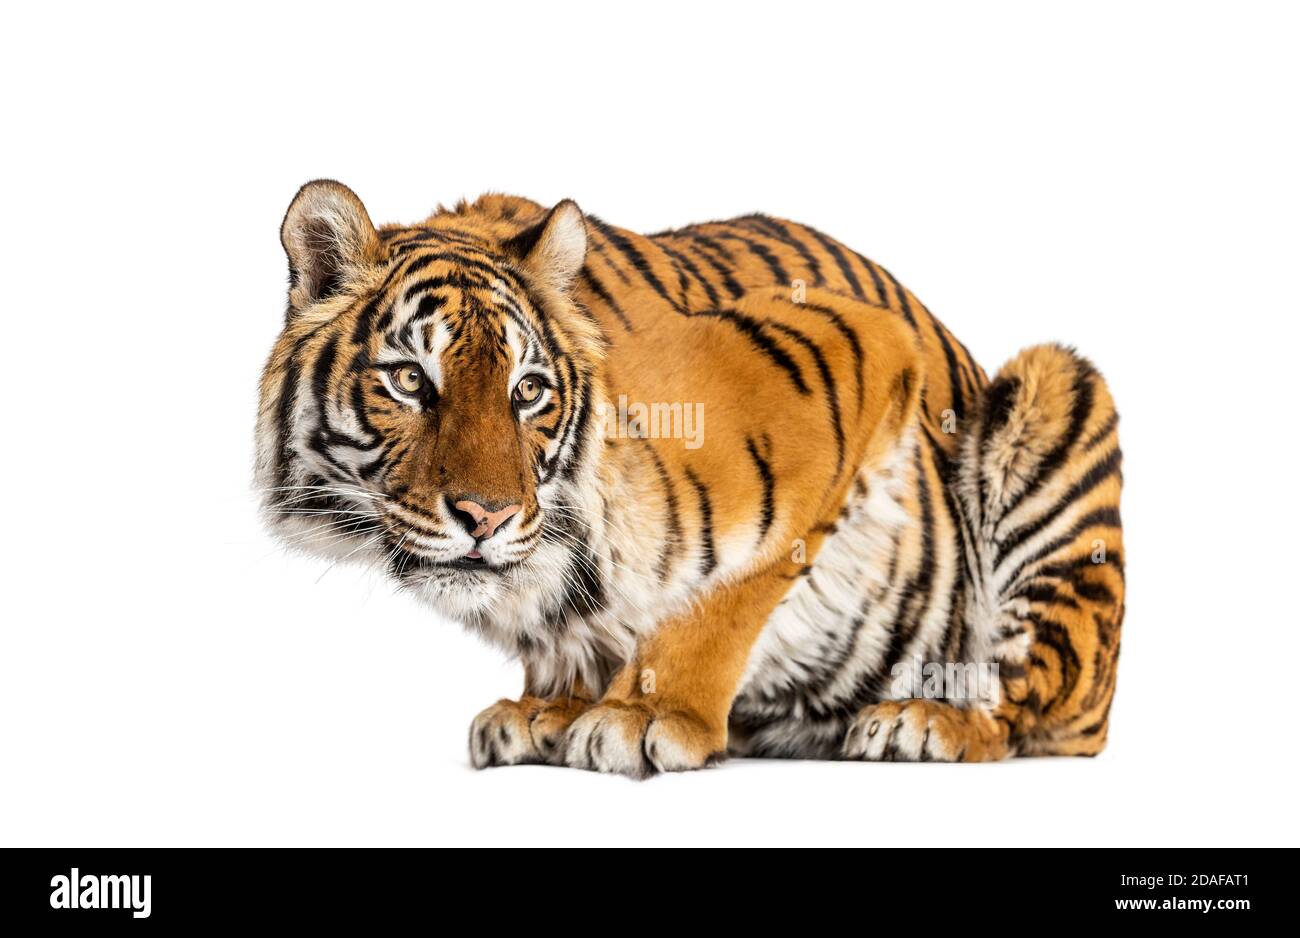 Tiger questioning, isolated on white Stock Photo